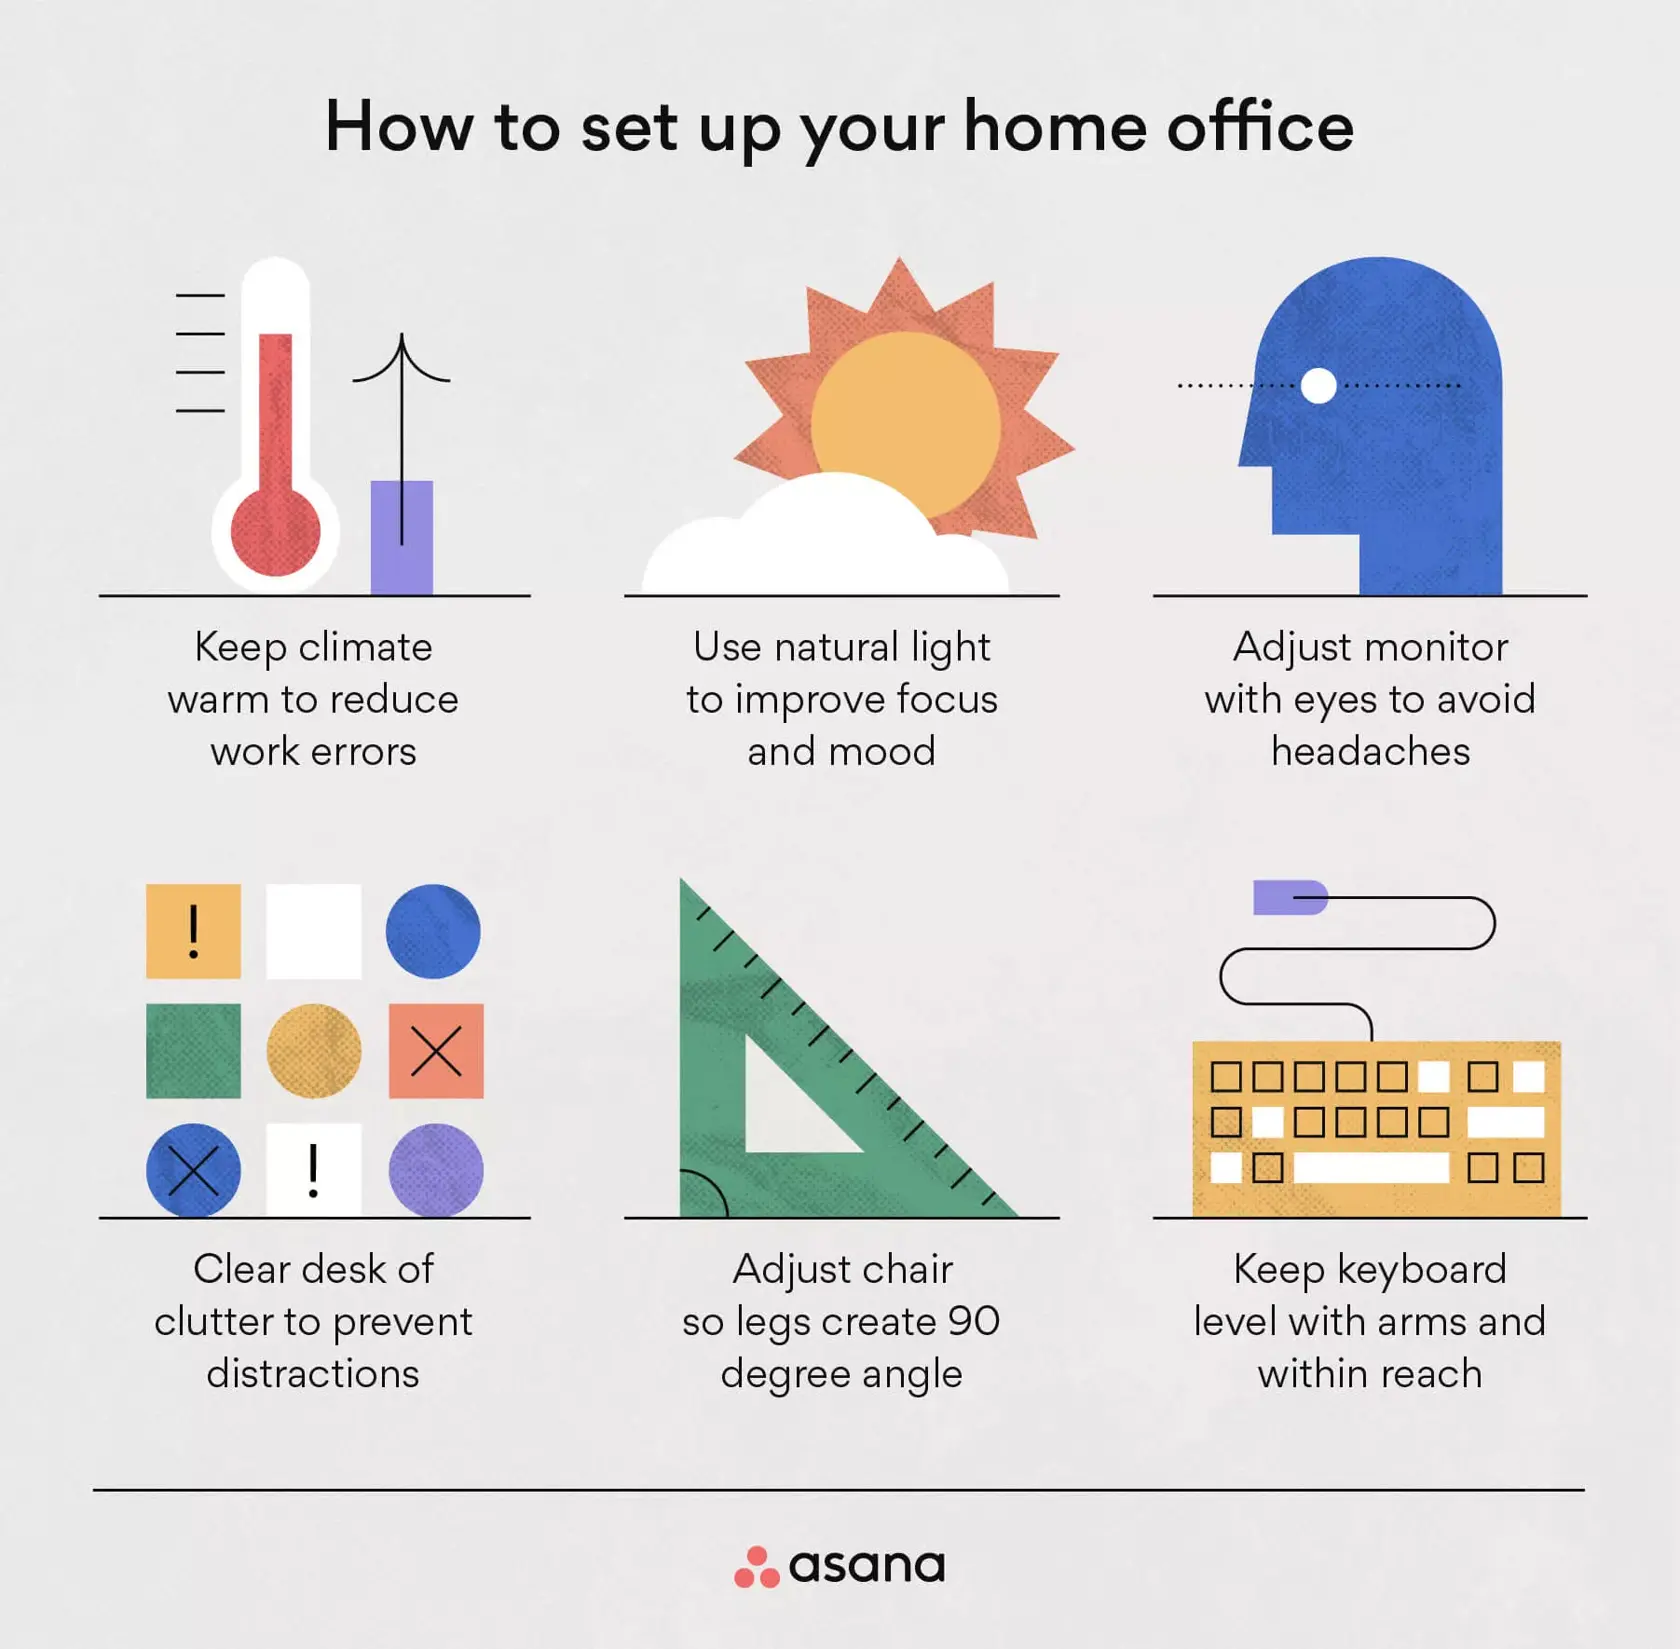 How to set up your home office